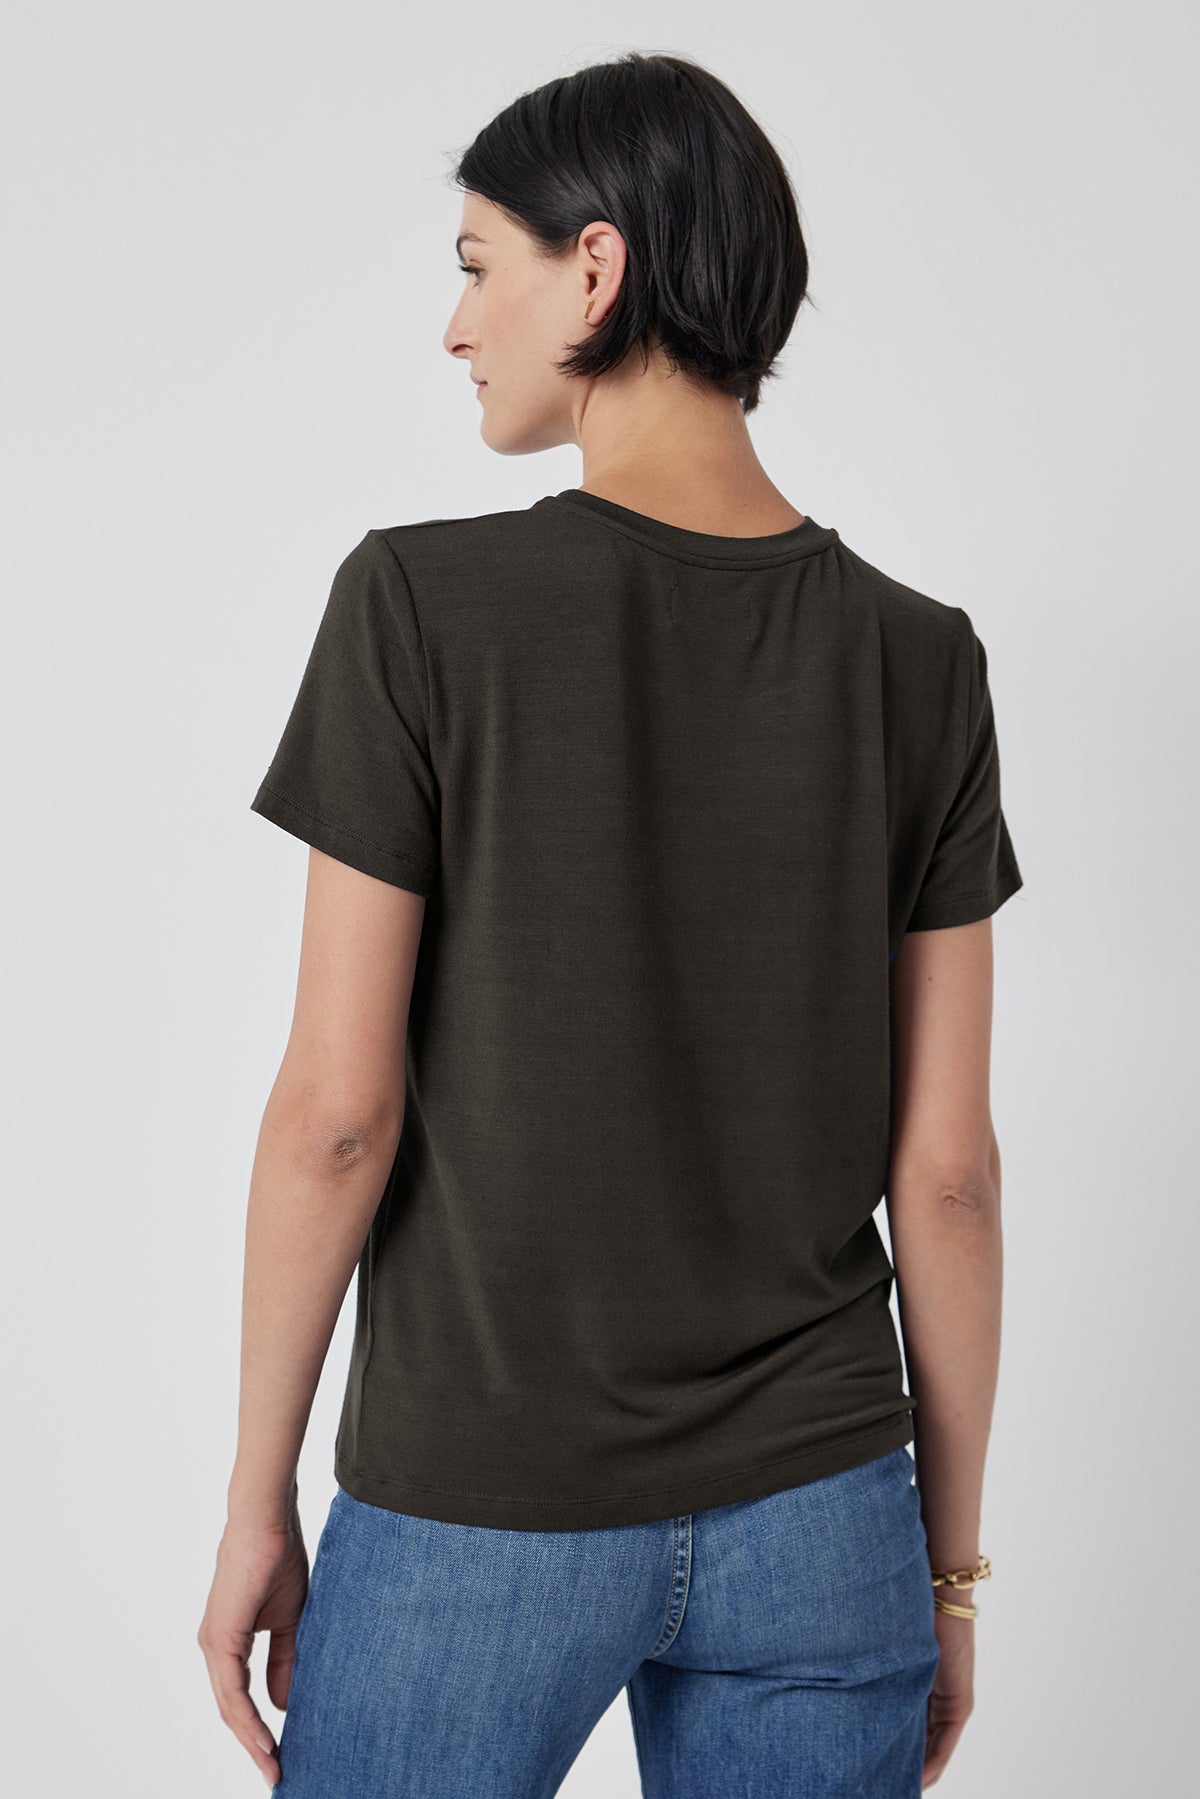 Woman wearing a plain SOLANA TEE in olive green from Velvet by Jenny Graham and blue jeans viewed from the back.-36290523562177